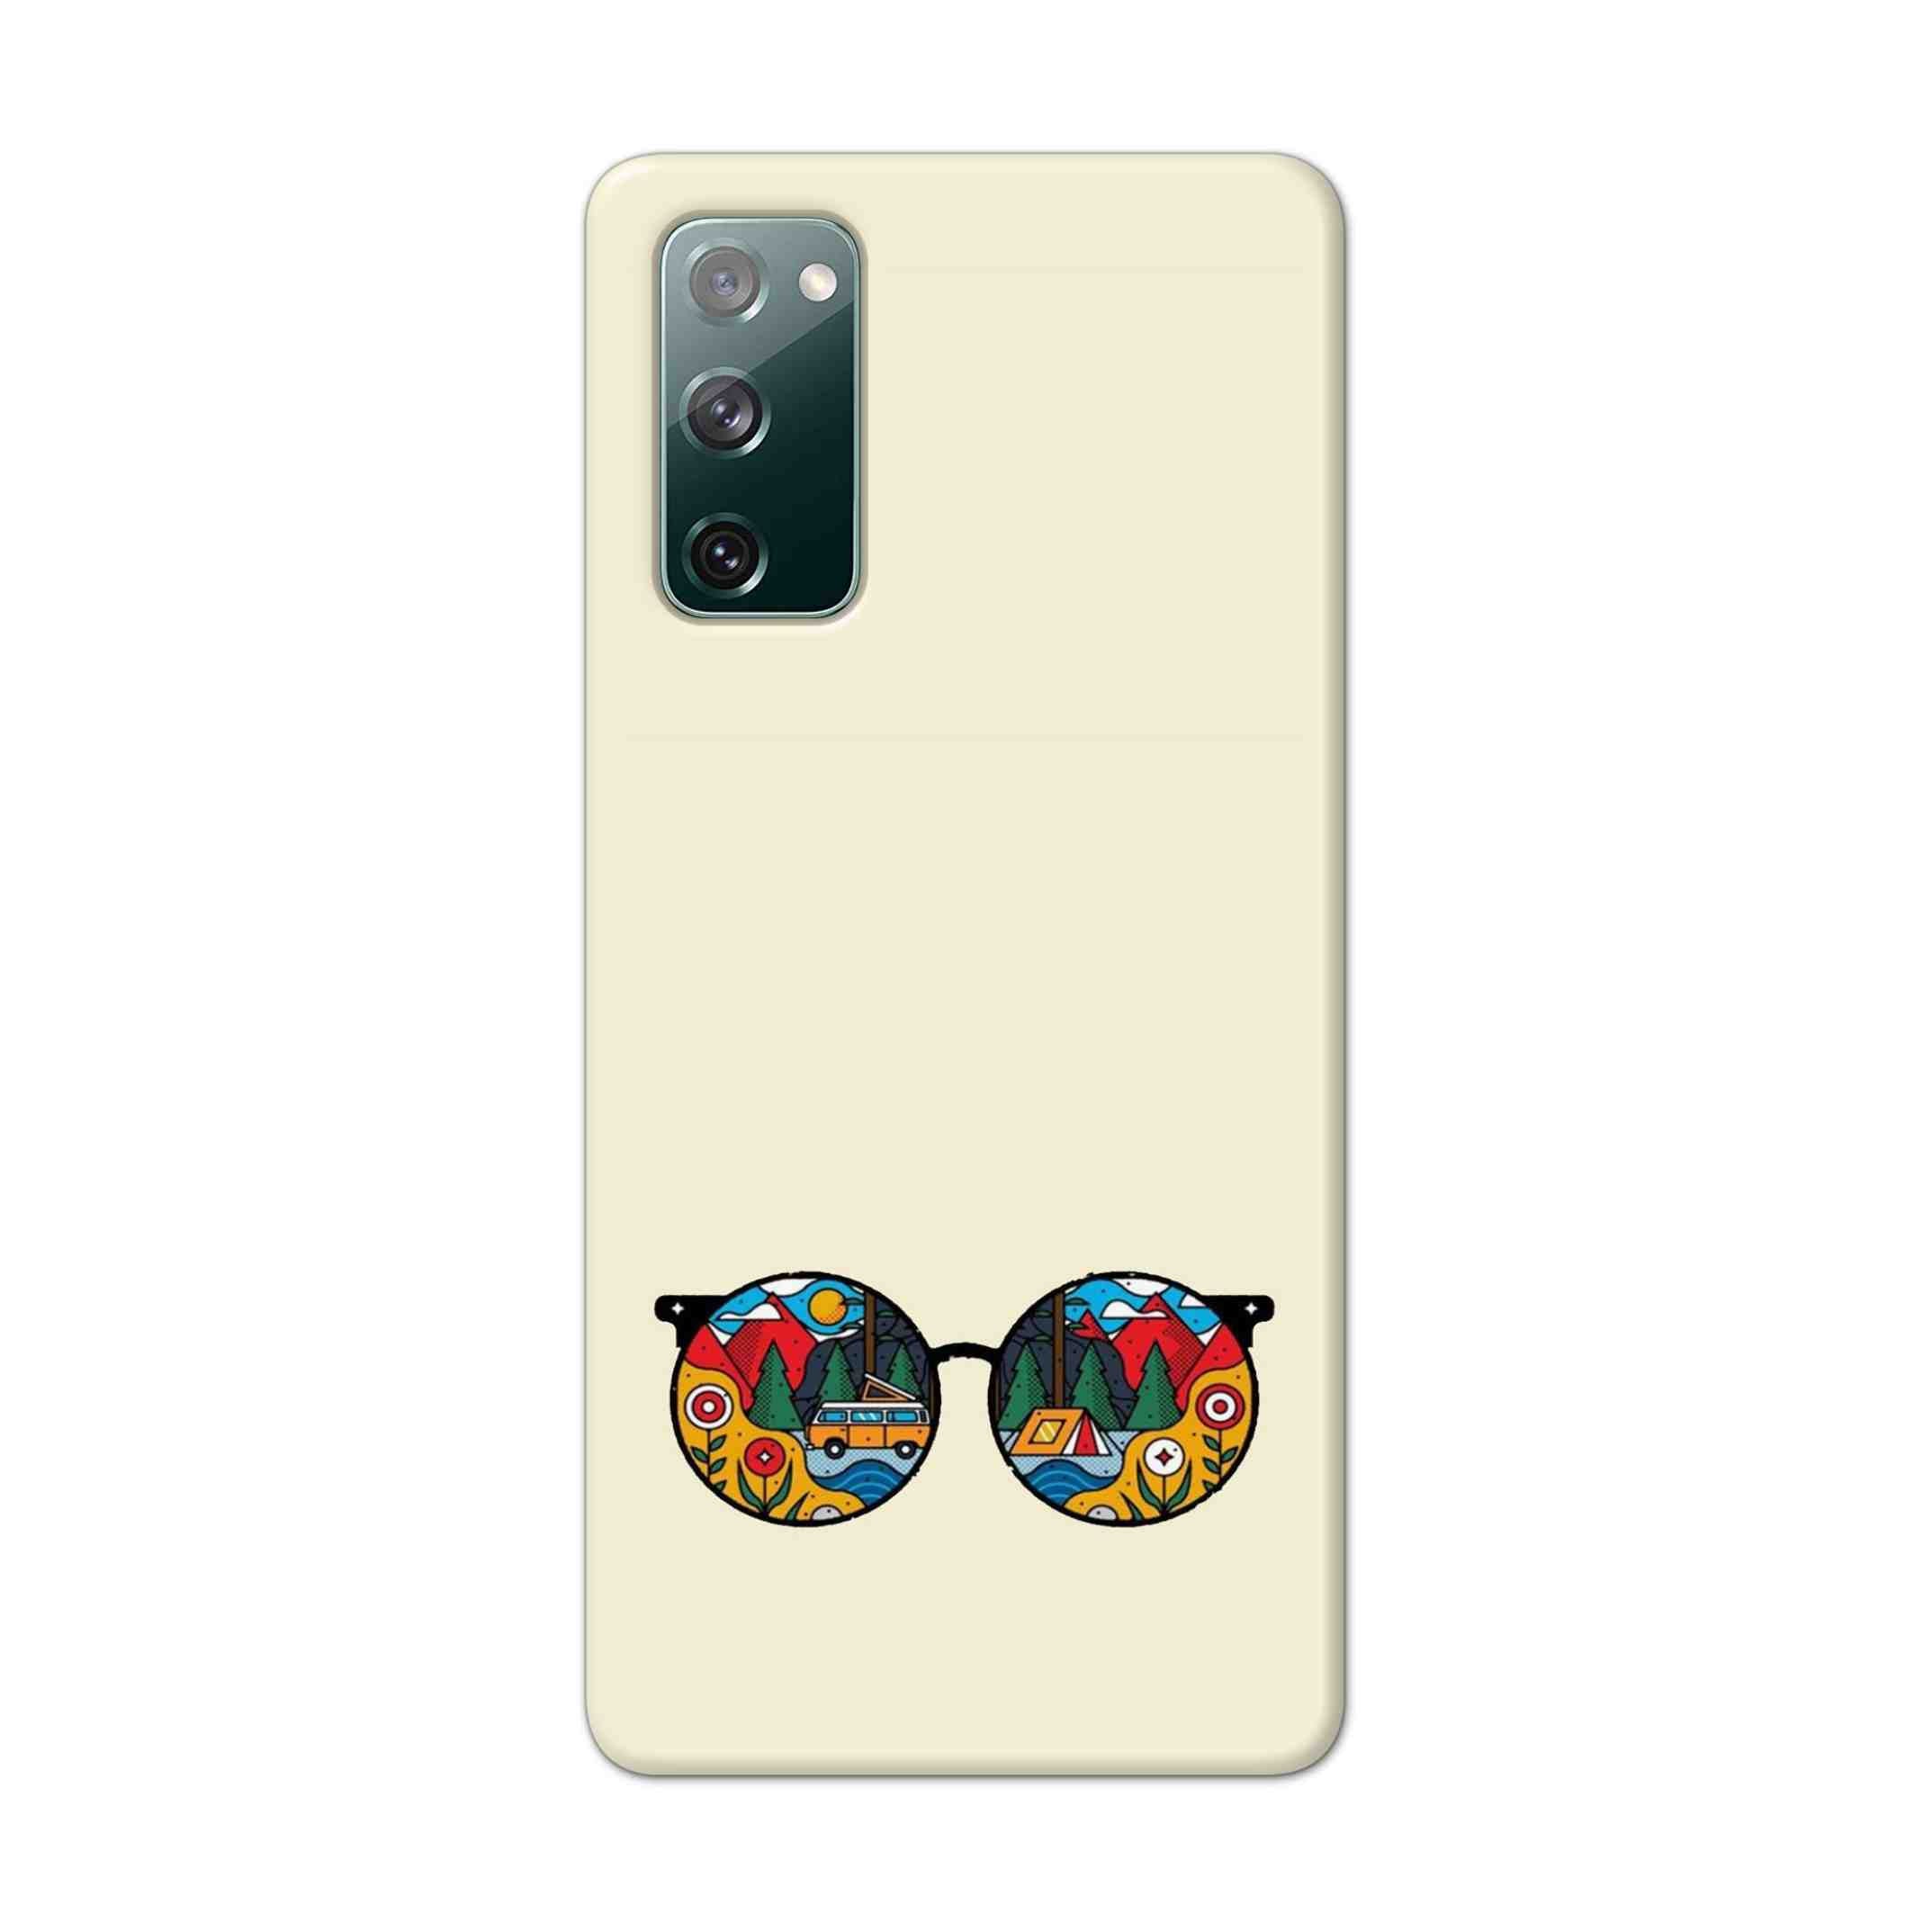 Buy Rainbow Sunglasses Hard Back Mobile Phone Case Cover For Samsung Galaxy S20 FE Online